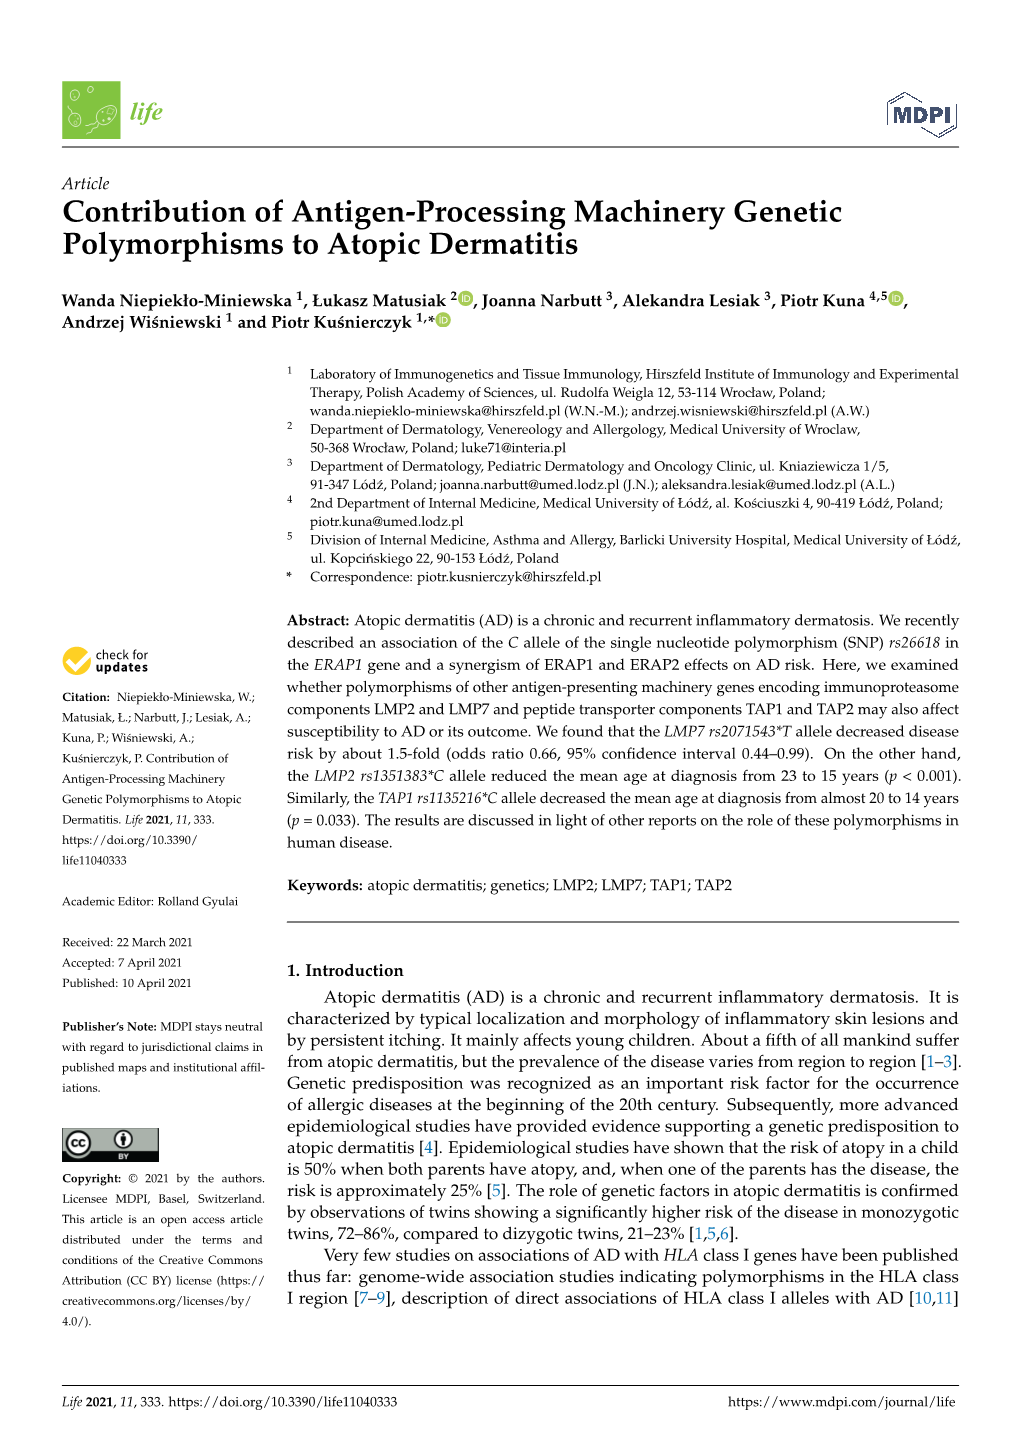 Contribution of Antigen-Processing Machinery Genetic Polymorphisms to Atopic Dermatitis